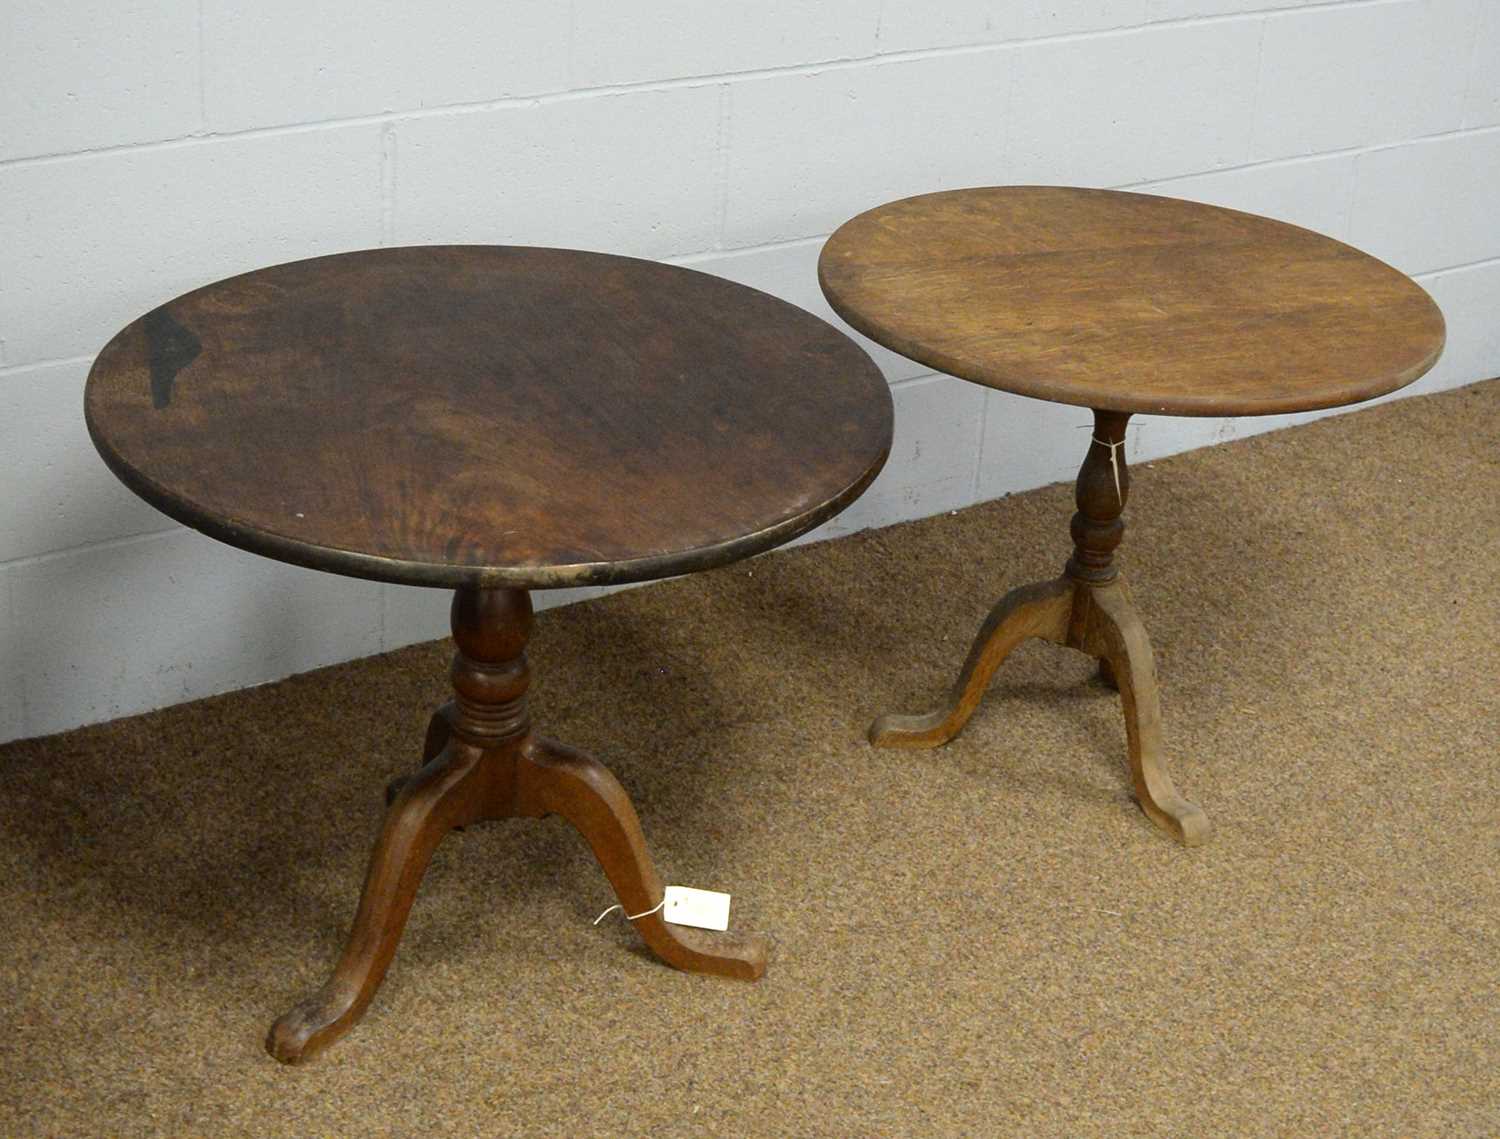 Two tripod tables. - Image 2 of 2